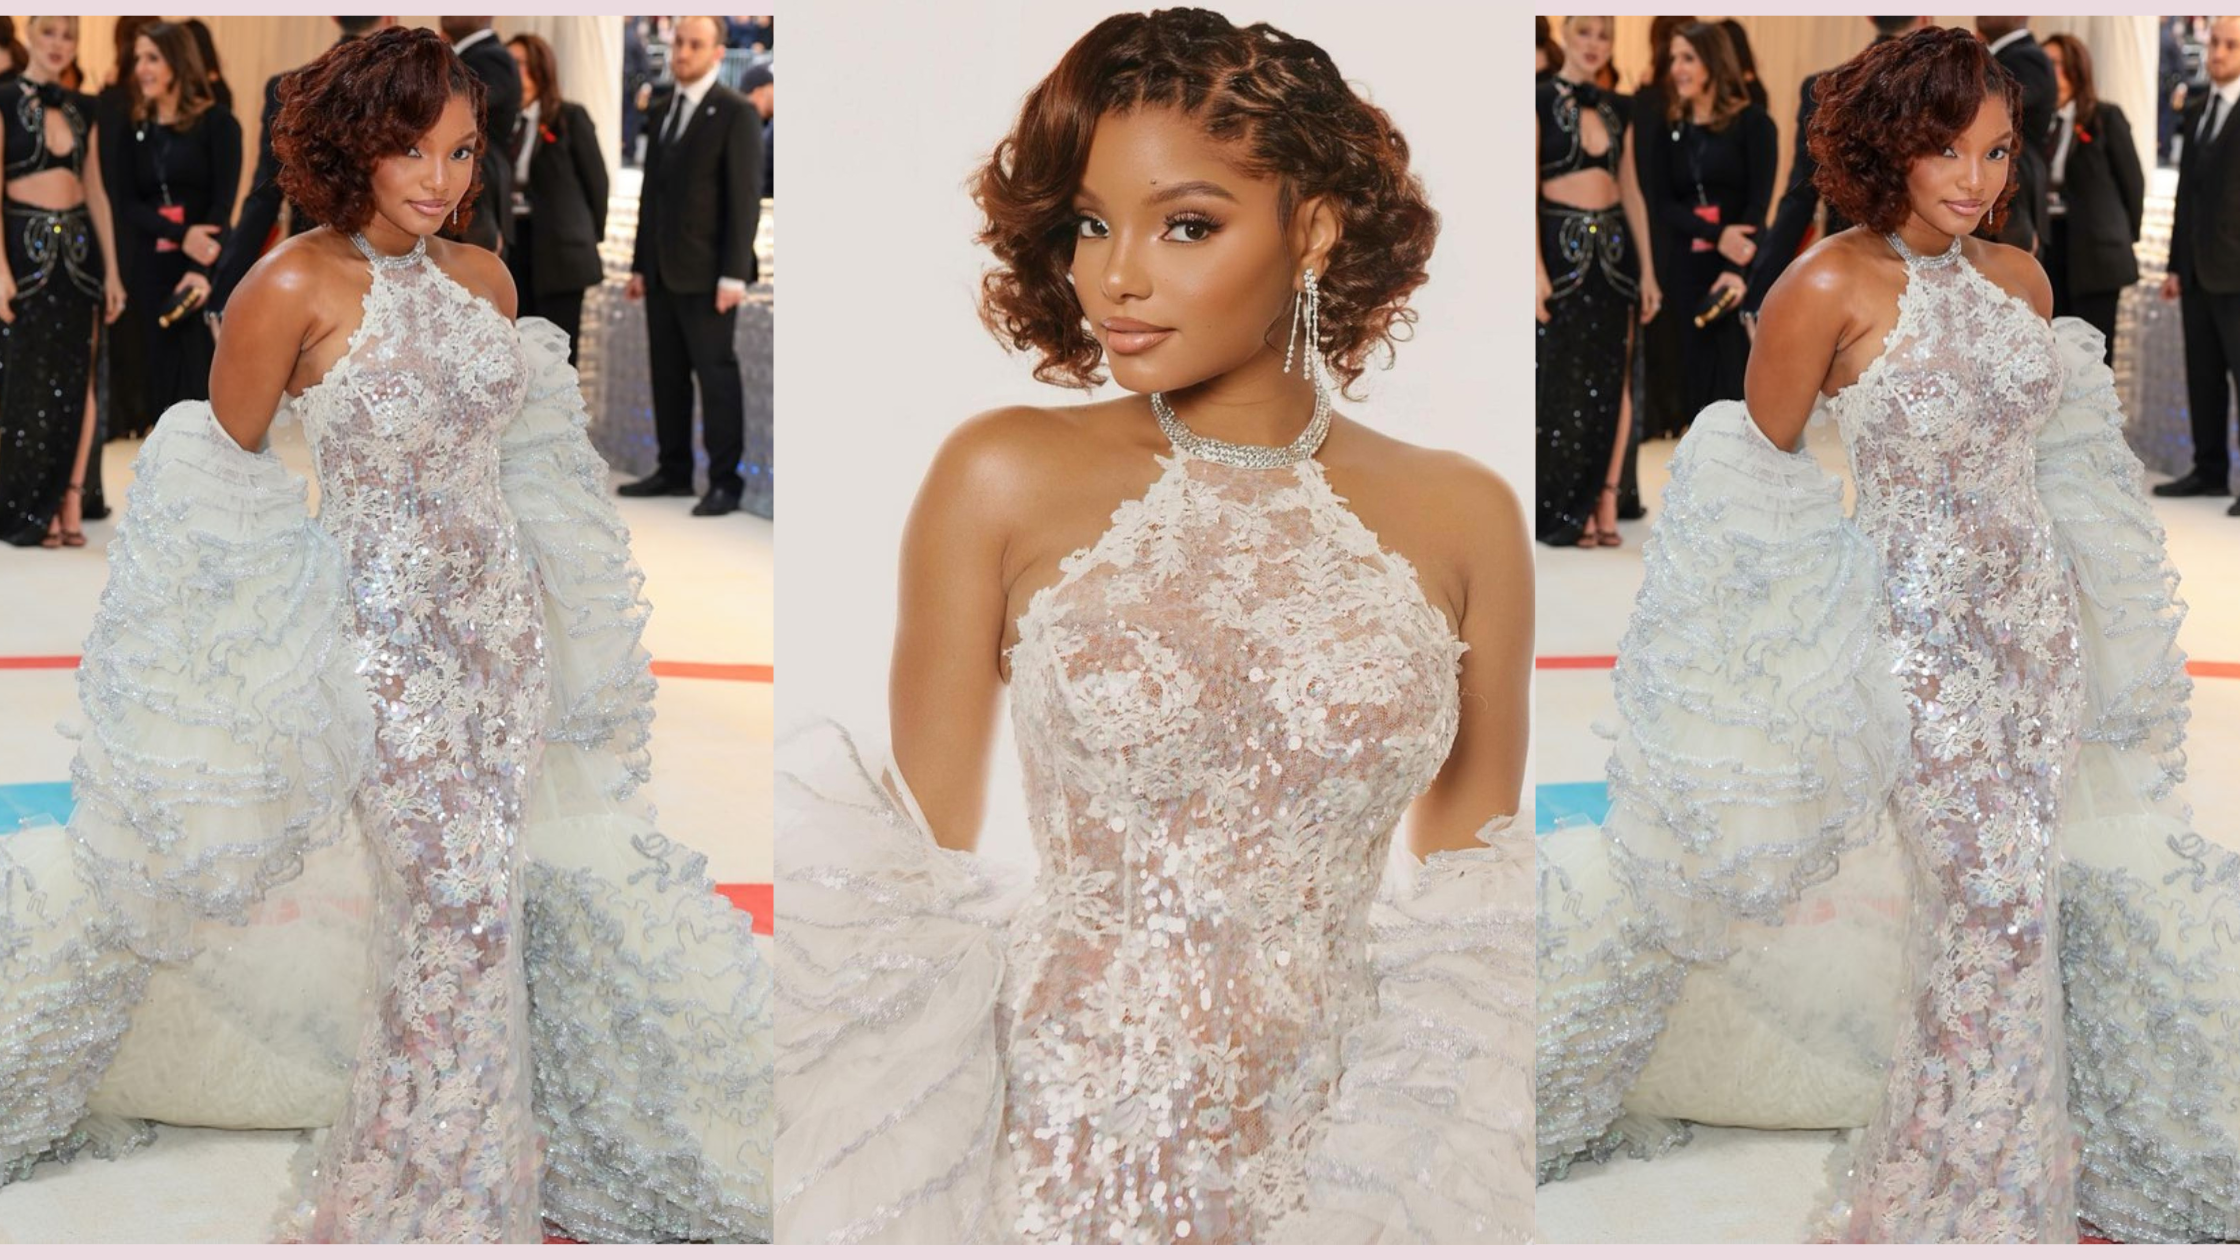 Halle Bailey's Hairstyle at the Met Gala Hair Had Us Seeing Double